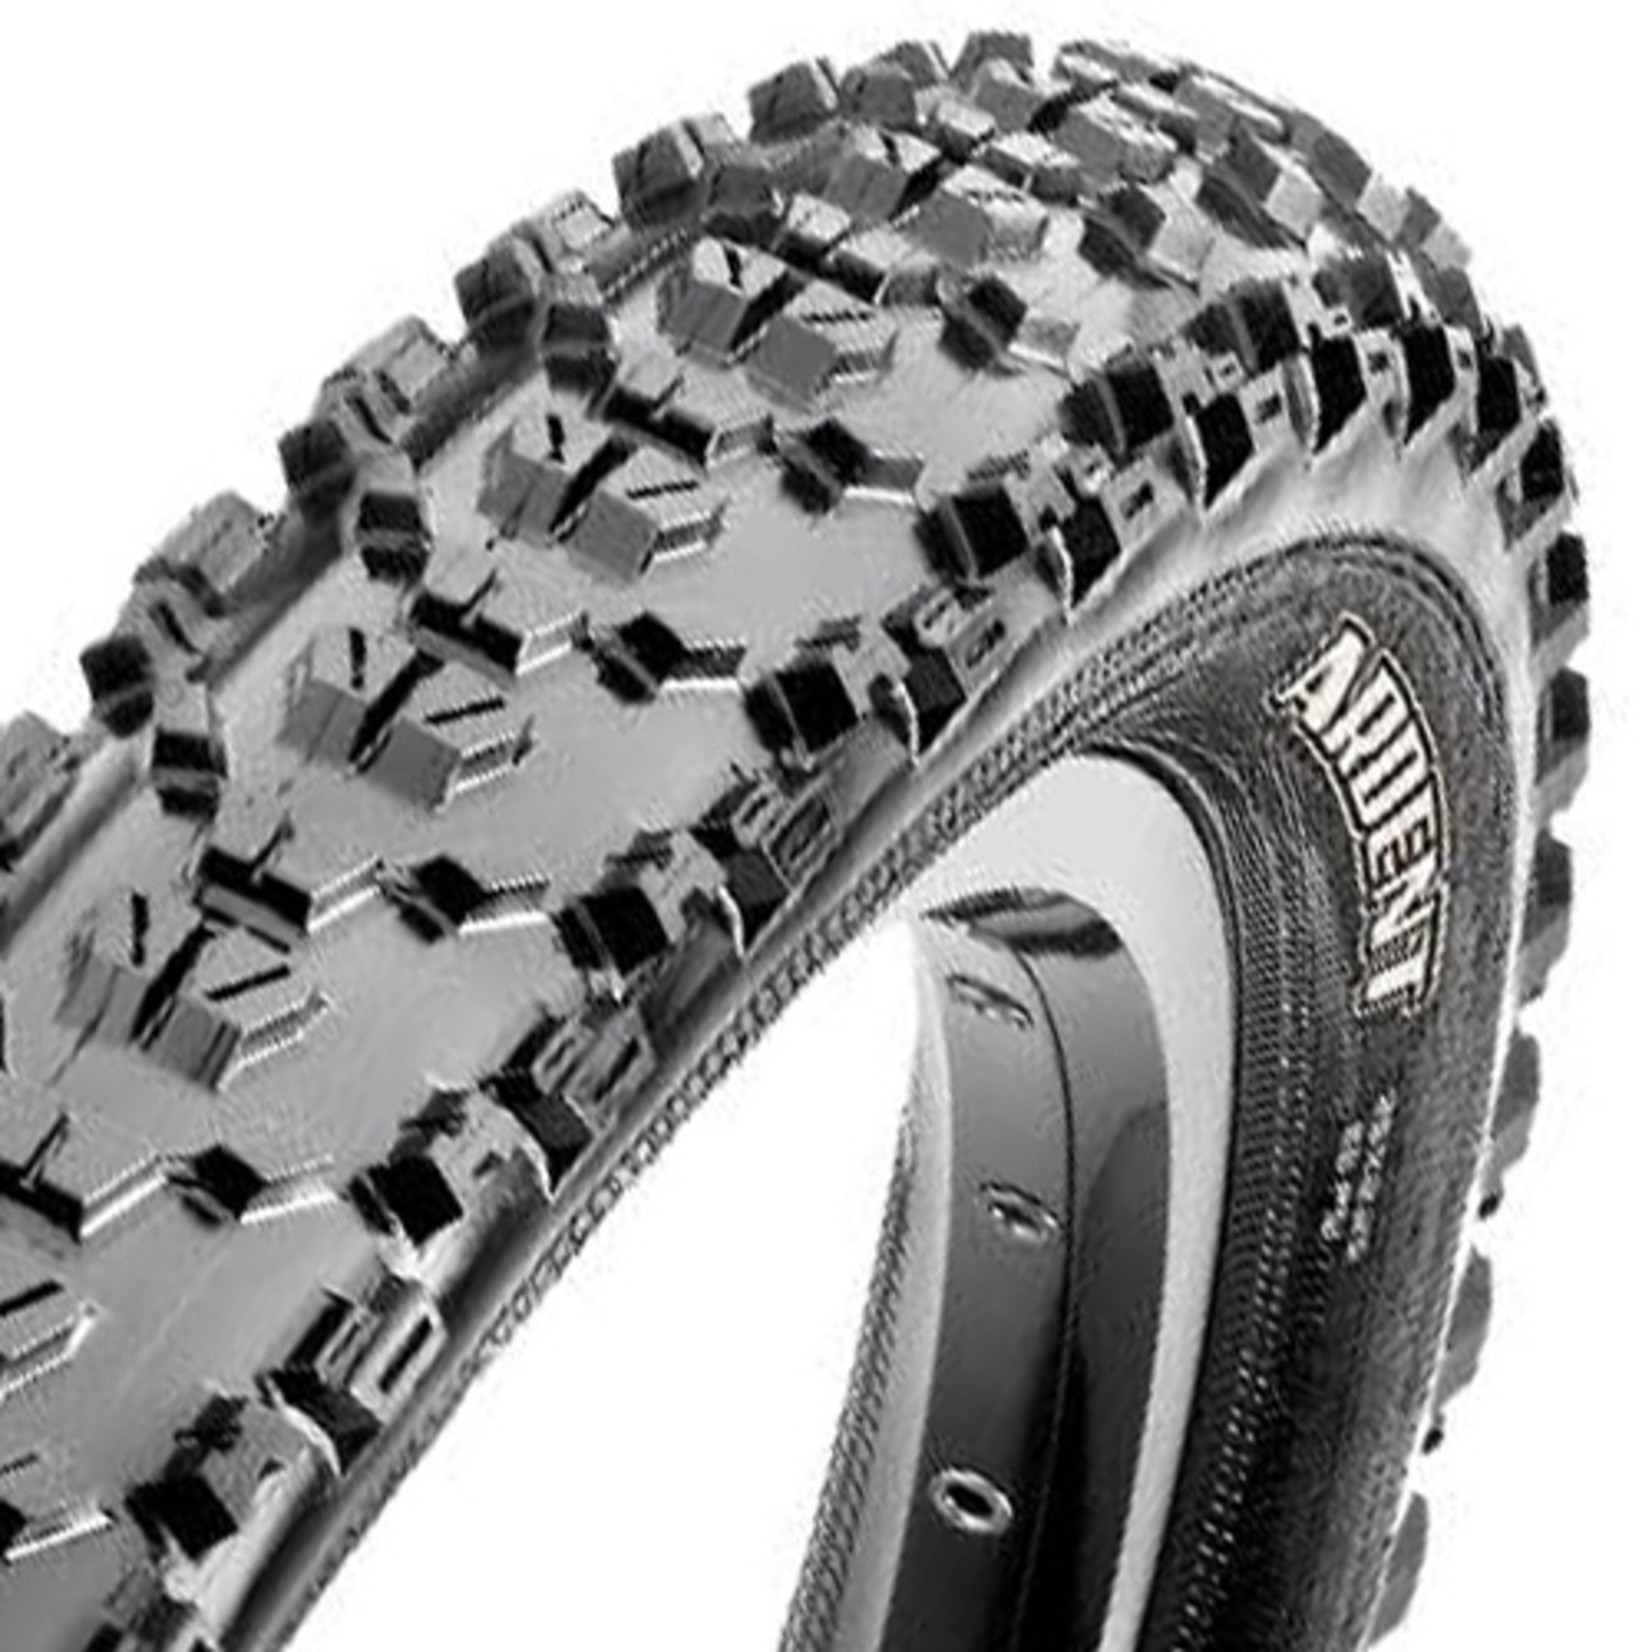 MAXXIS MAXXIS Ardent - 27.5 X 2.40 - Folding TR - EXO 60 TPI - Dual Compound - Black